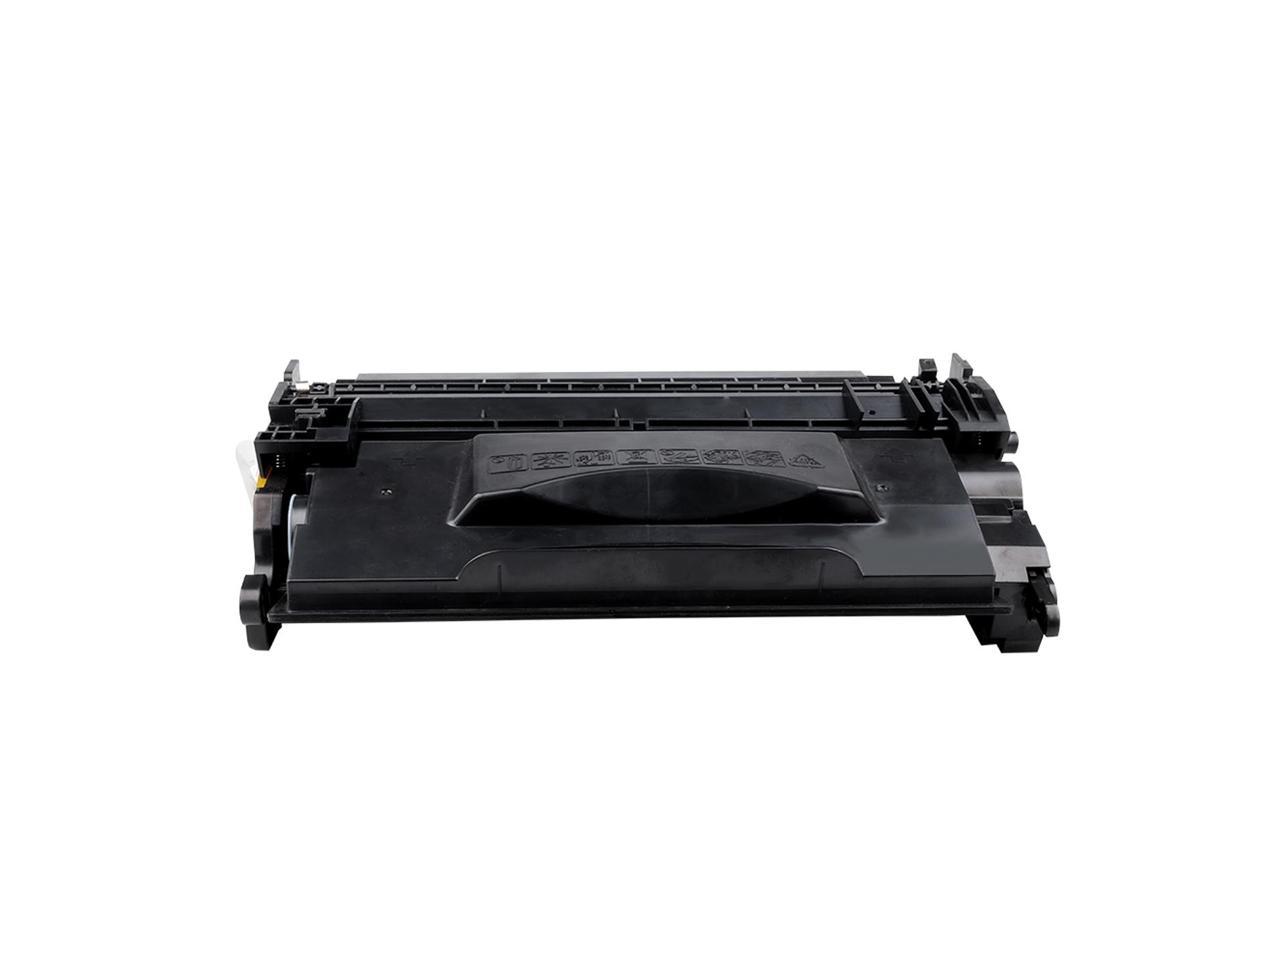 TCT Premium Compatible Toner Cartridge Replacement for HP 26X CF226X Black High Yield Works with HP Laserjet Pro M402D M402DN M402N - 8 Pack MFP M426DW M426FDN M426FDW Printers 9,000 Pages